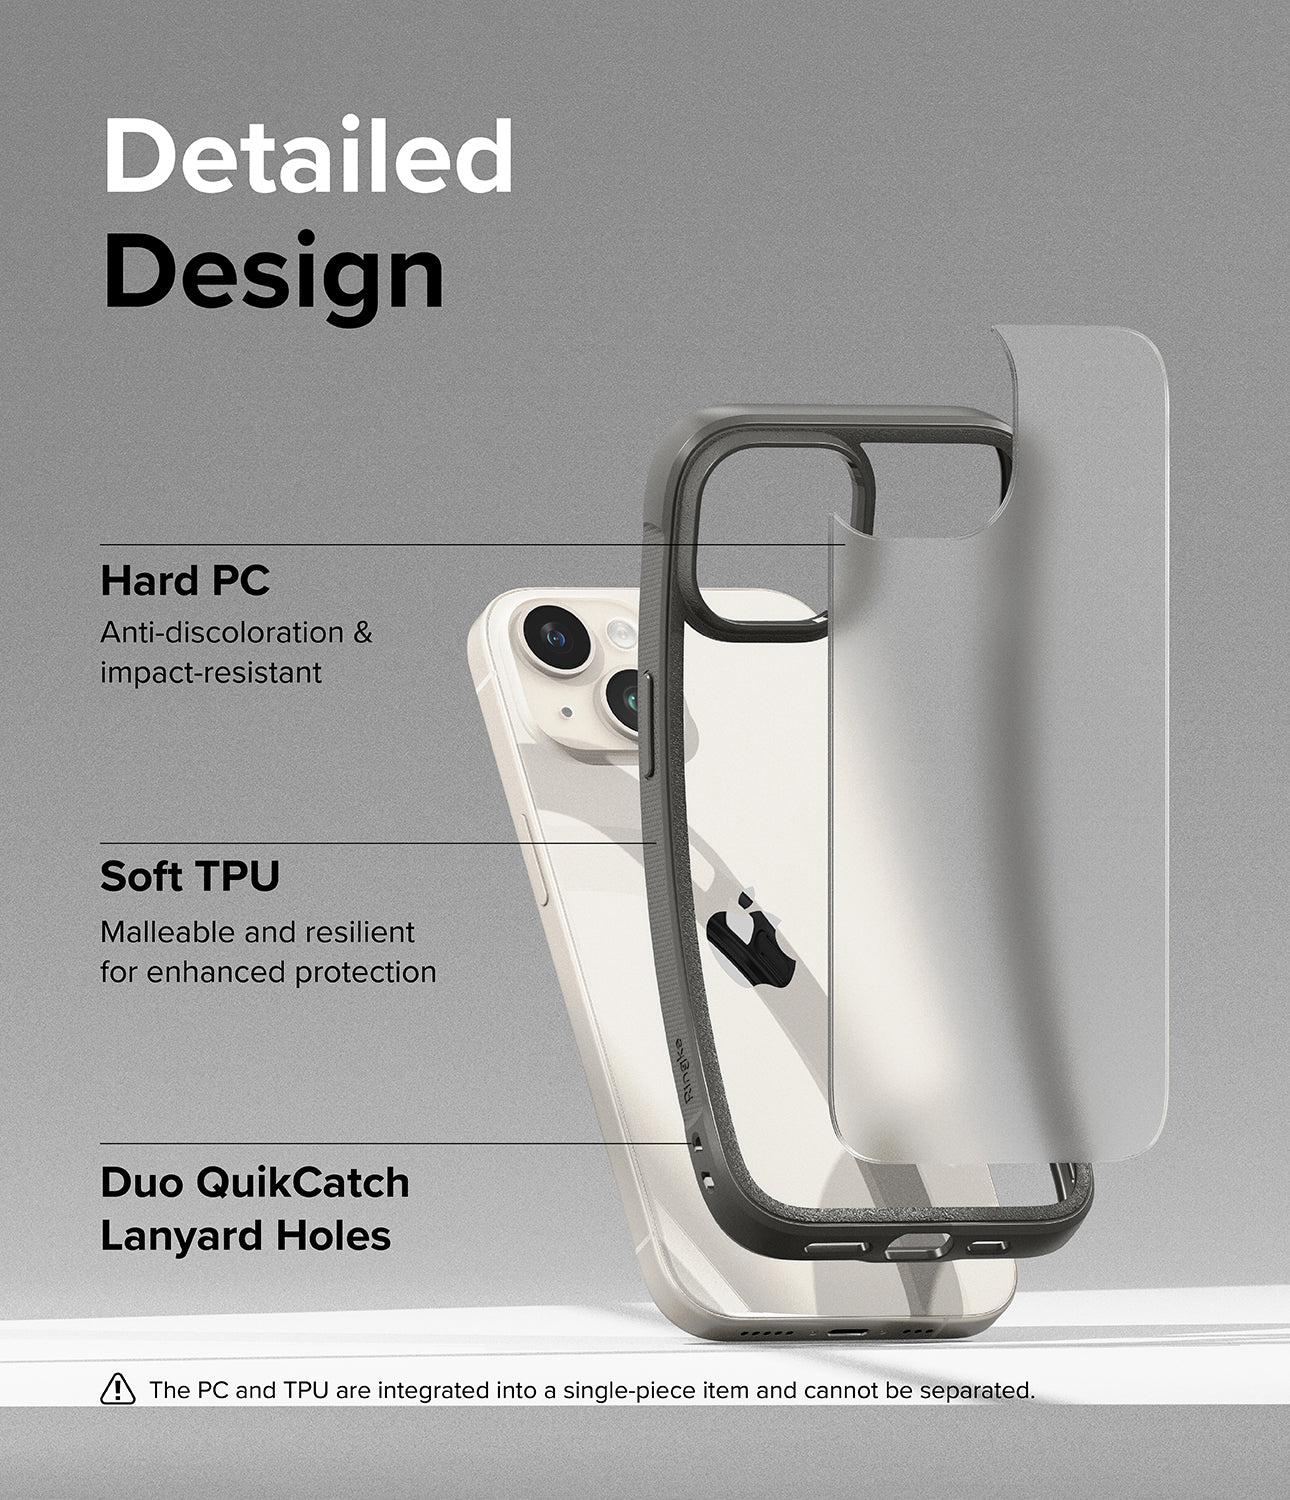 iPhone 15 Case | Fusion Bold Matte/Gray - Detailed Design. Anti-Discoloration and impact-resistant with Hard PC. Malleable and resilient for enhanced protection with Soft TPU. Duo QuikCatch Lanyard Holes.